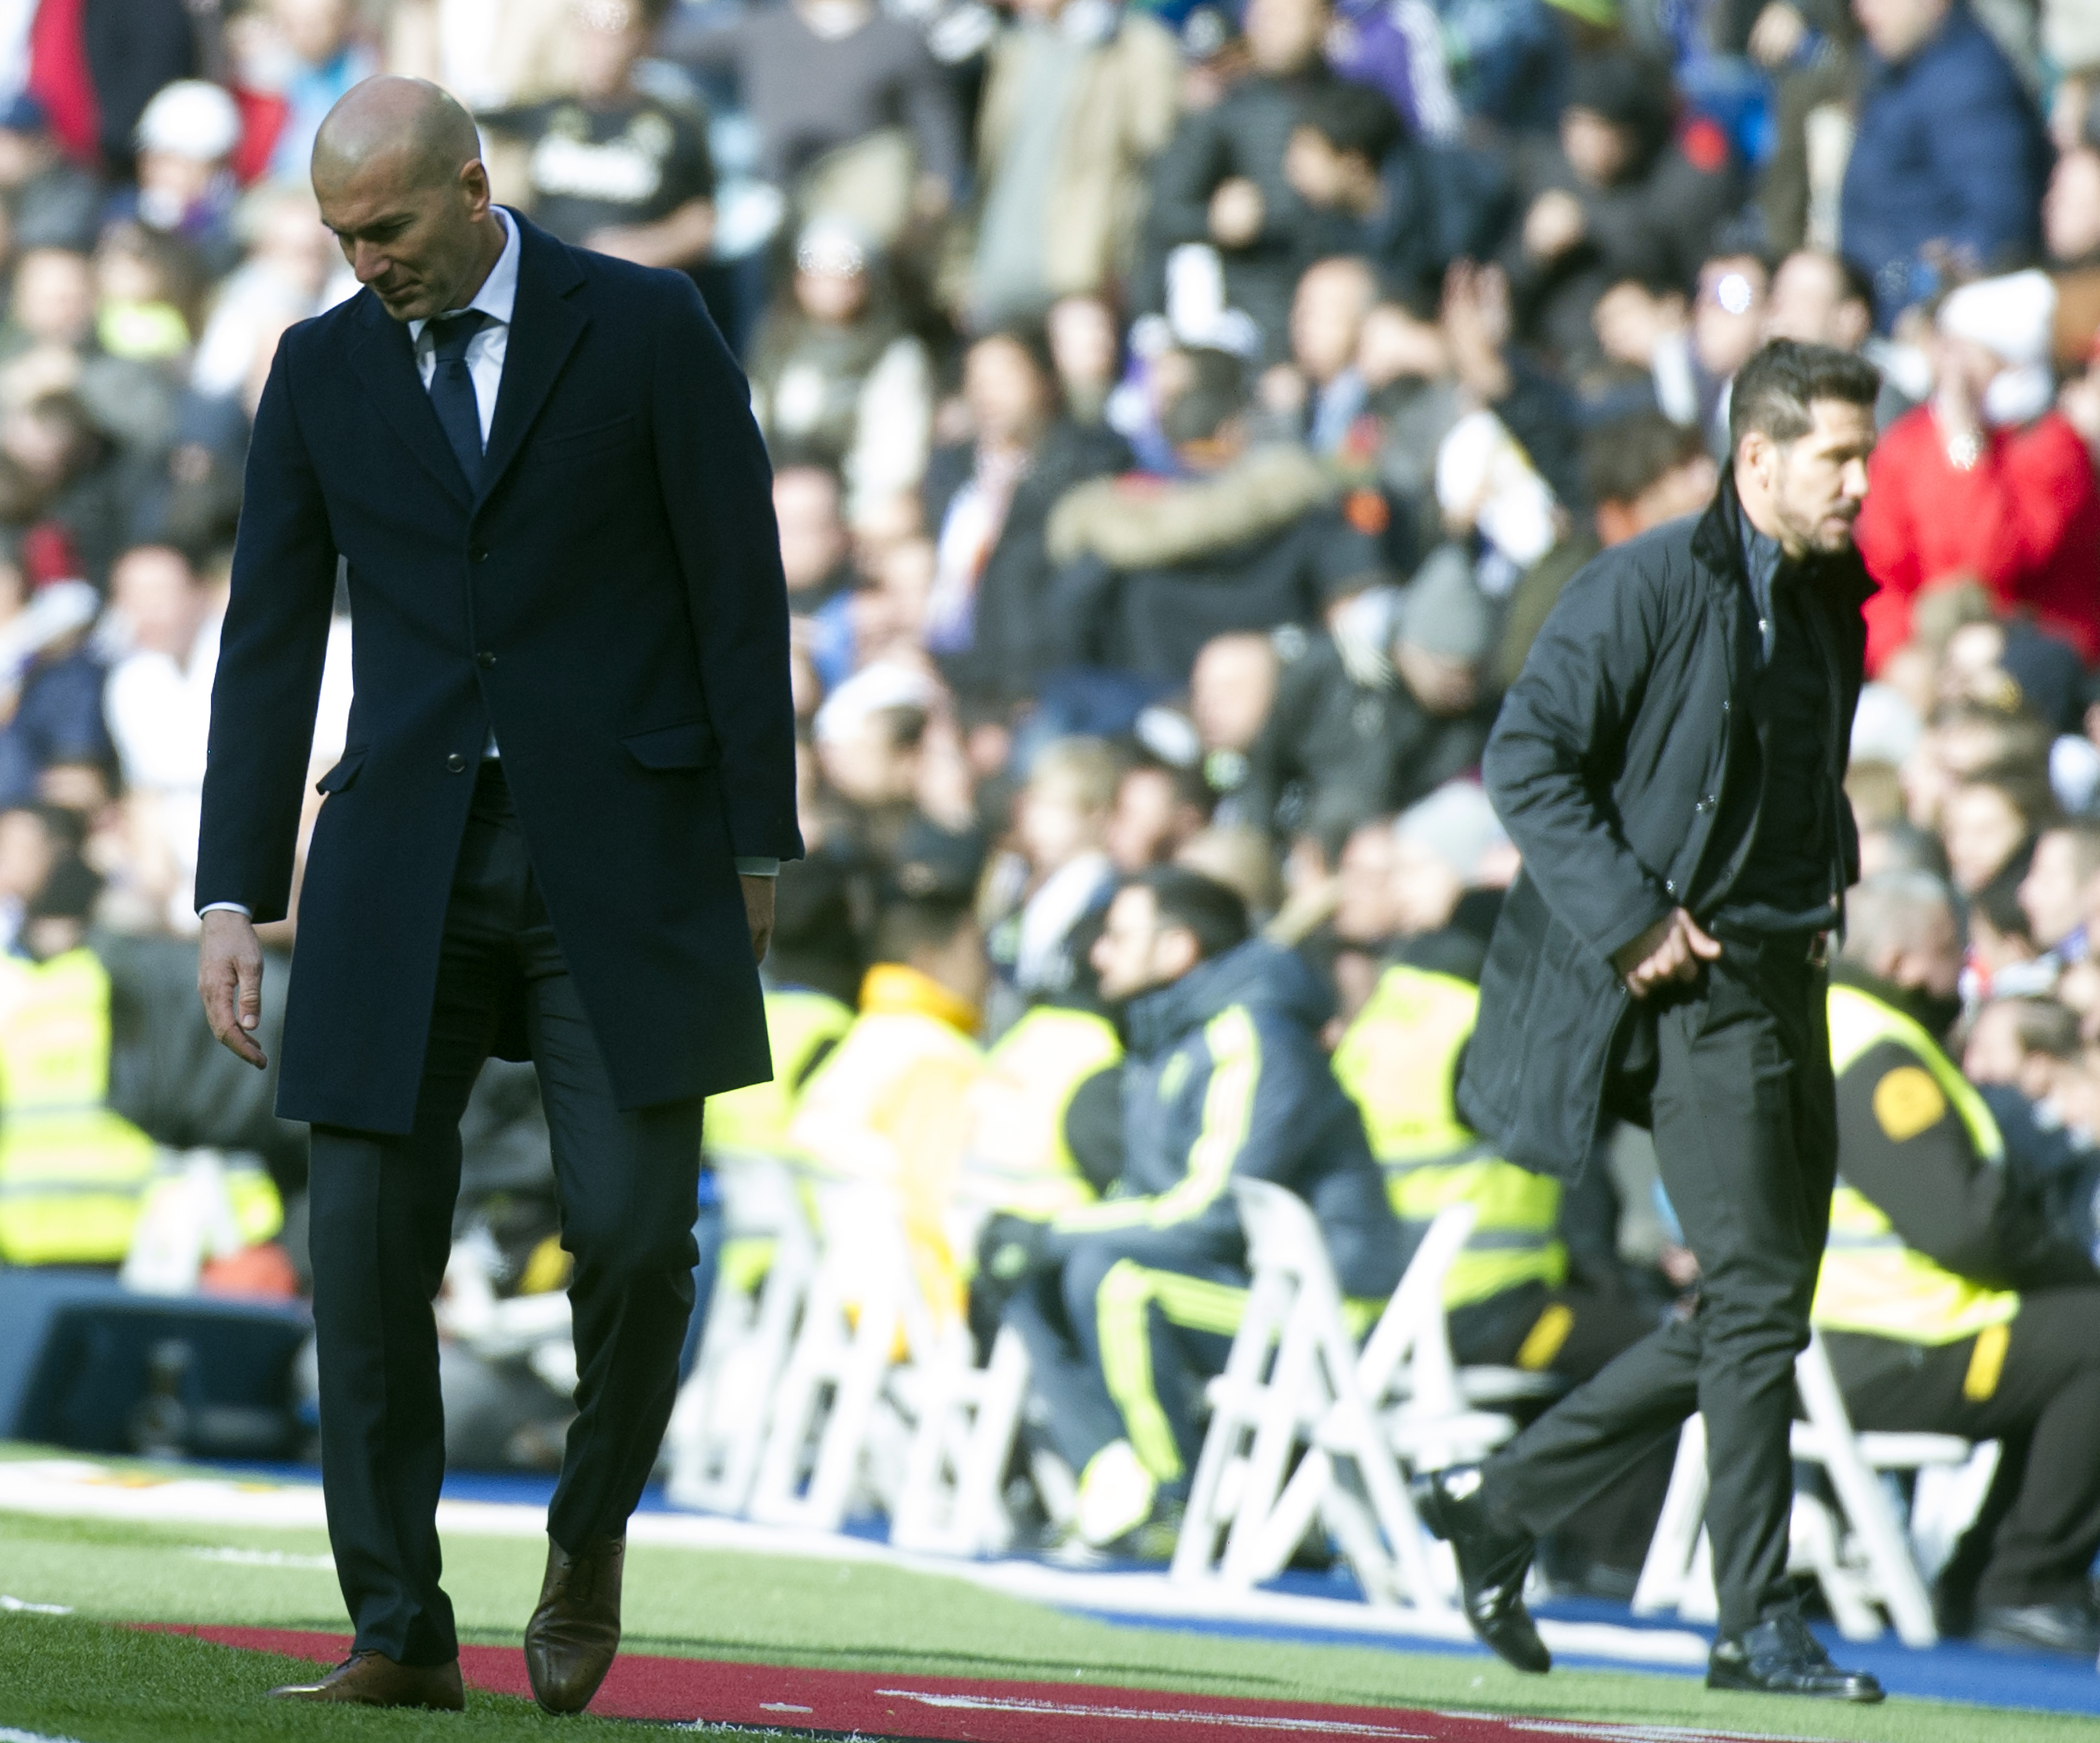 Real Madrid's French coach Zinedine Zidane (L) looks down next to Atletico Madrid's Argentinian coach Diego Simeone during the Spanish league football match Real Madrid CF vs Club Atletico de Madrid at the Santiago Bernabeu stadium in Madrid on February 27, 2016. / AFP / CURTO DE LA TORRE        (Photo credit should read CURTO DE LA TORRE/AFP/Getty Images)